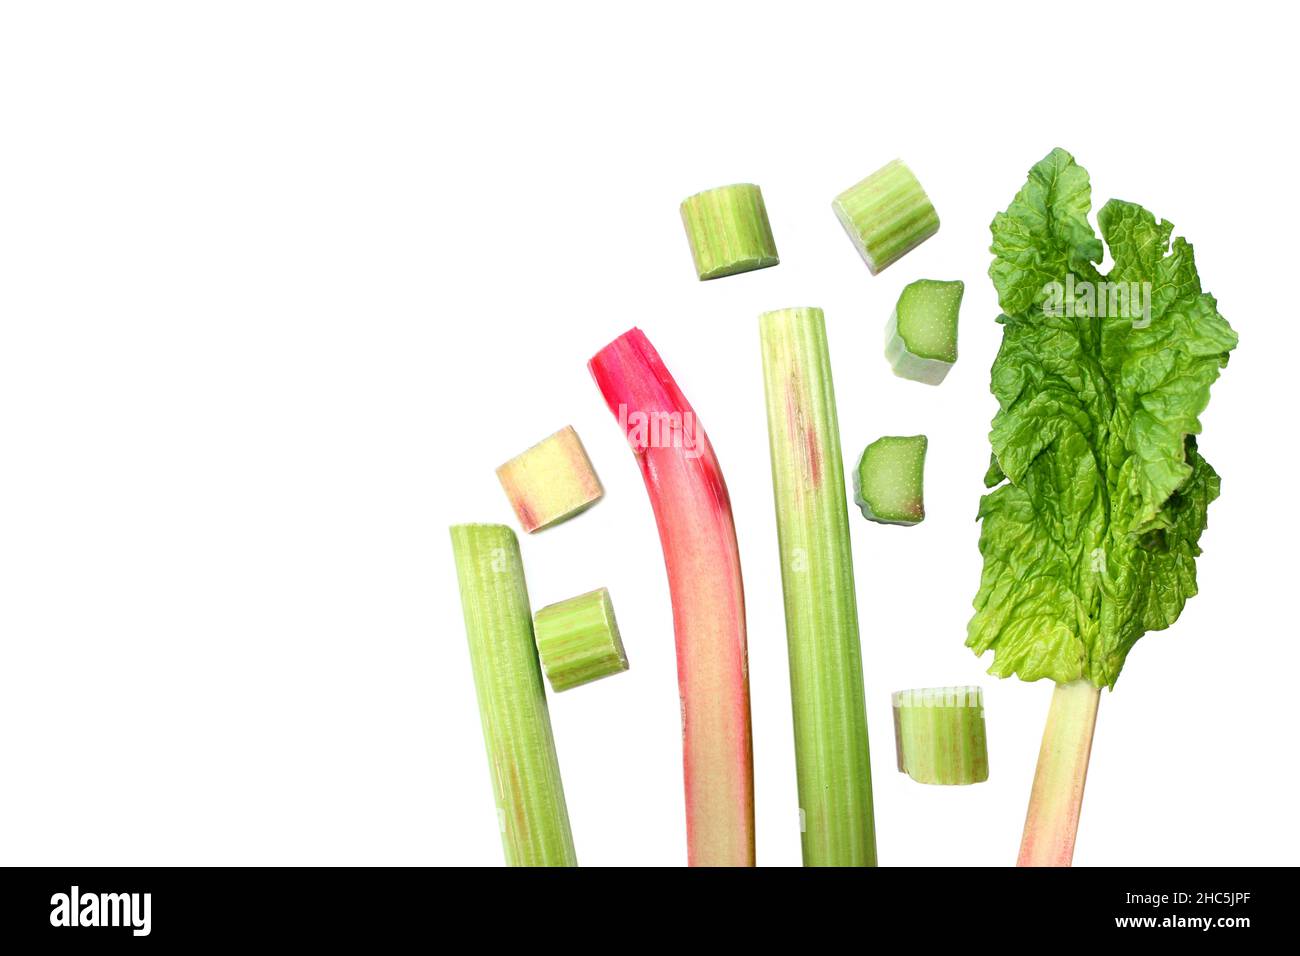 Fresh rhubarb. Red and green stems, whole and cut. Stock Photo